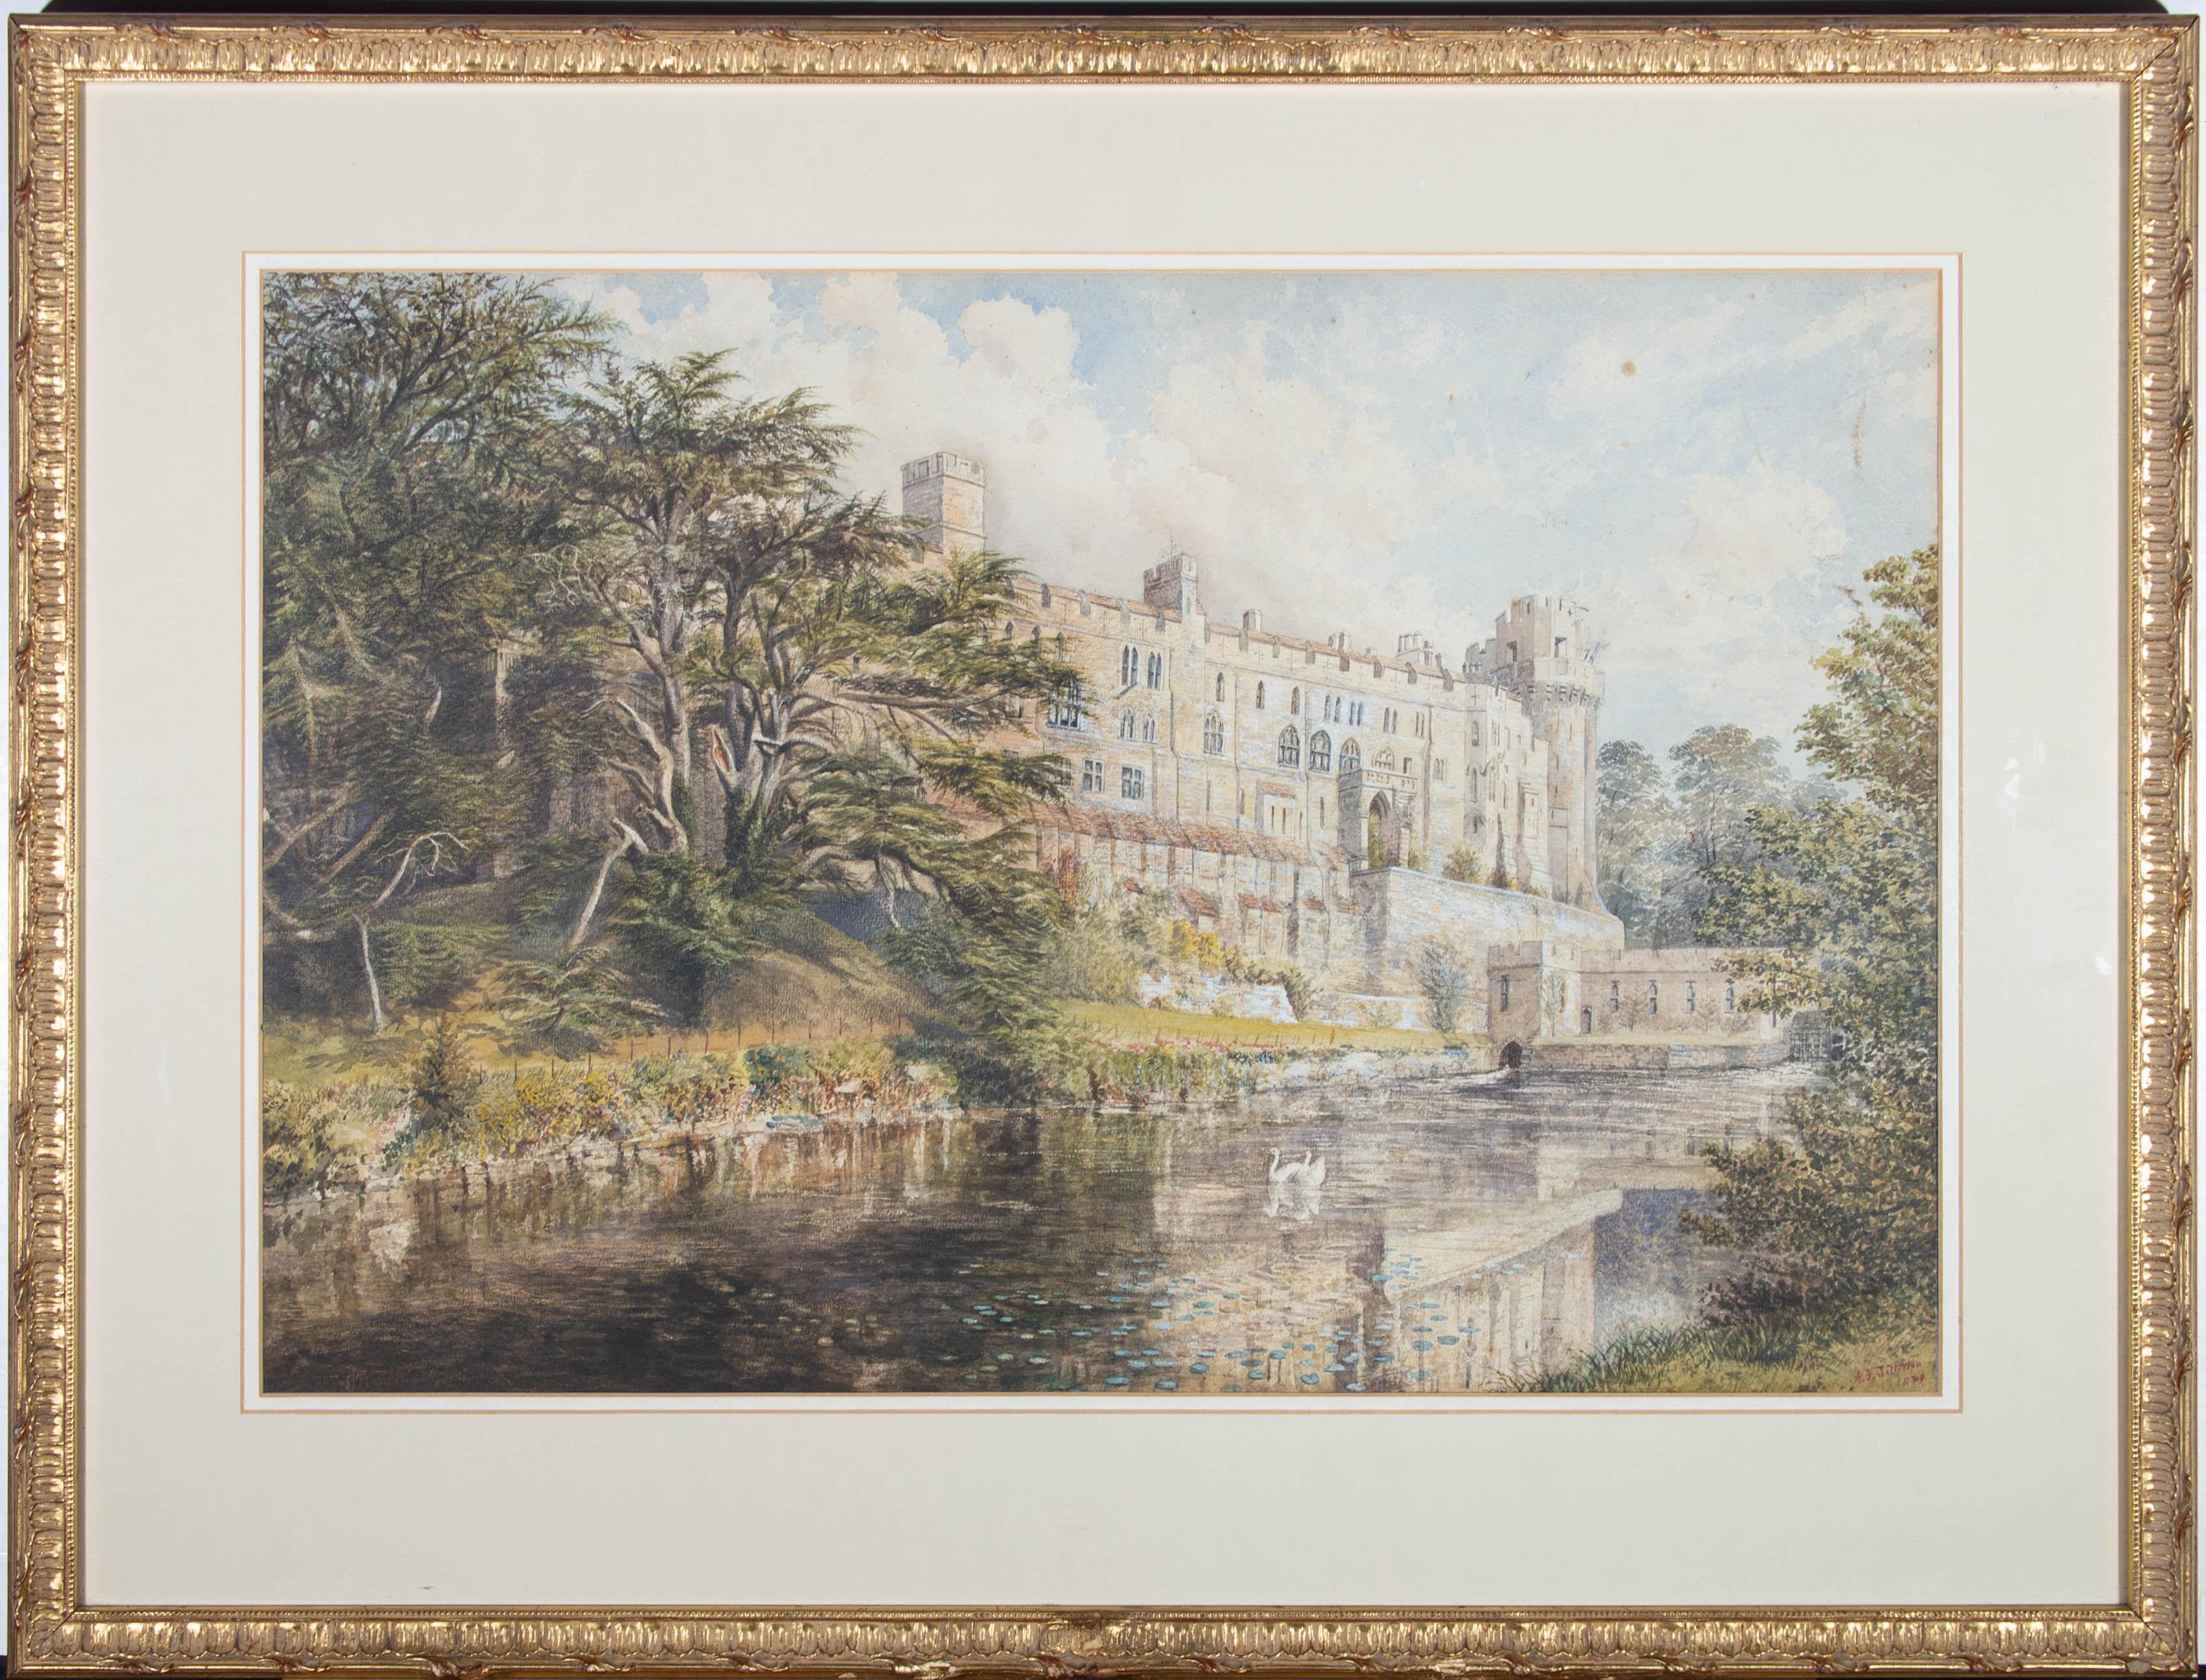 A striking architectural view of Warwick castle from the river. The scene is set on an idyllic Summer's day with swans swimming on the glassy water, surrounded by lily pads, under a blue sky with fluffy white clouds. The artist has signed and dated